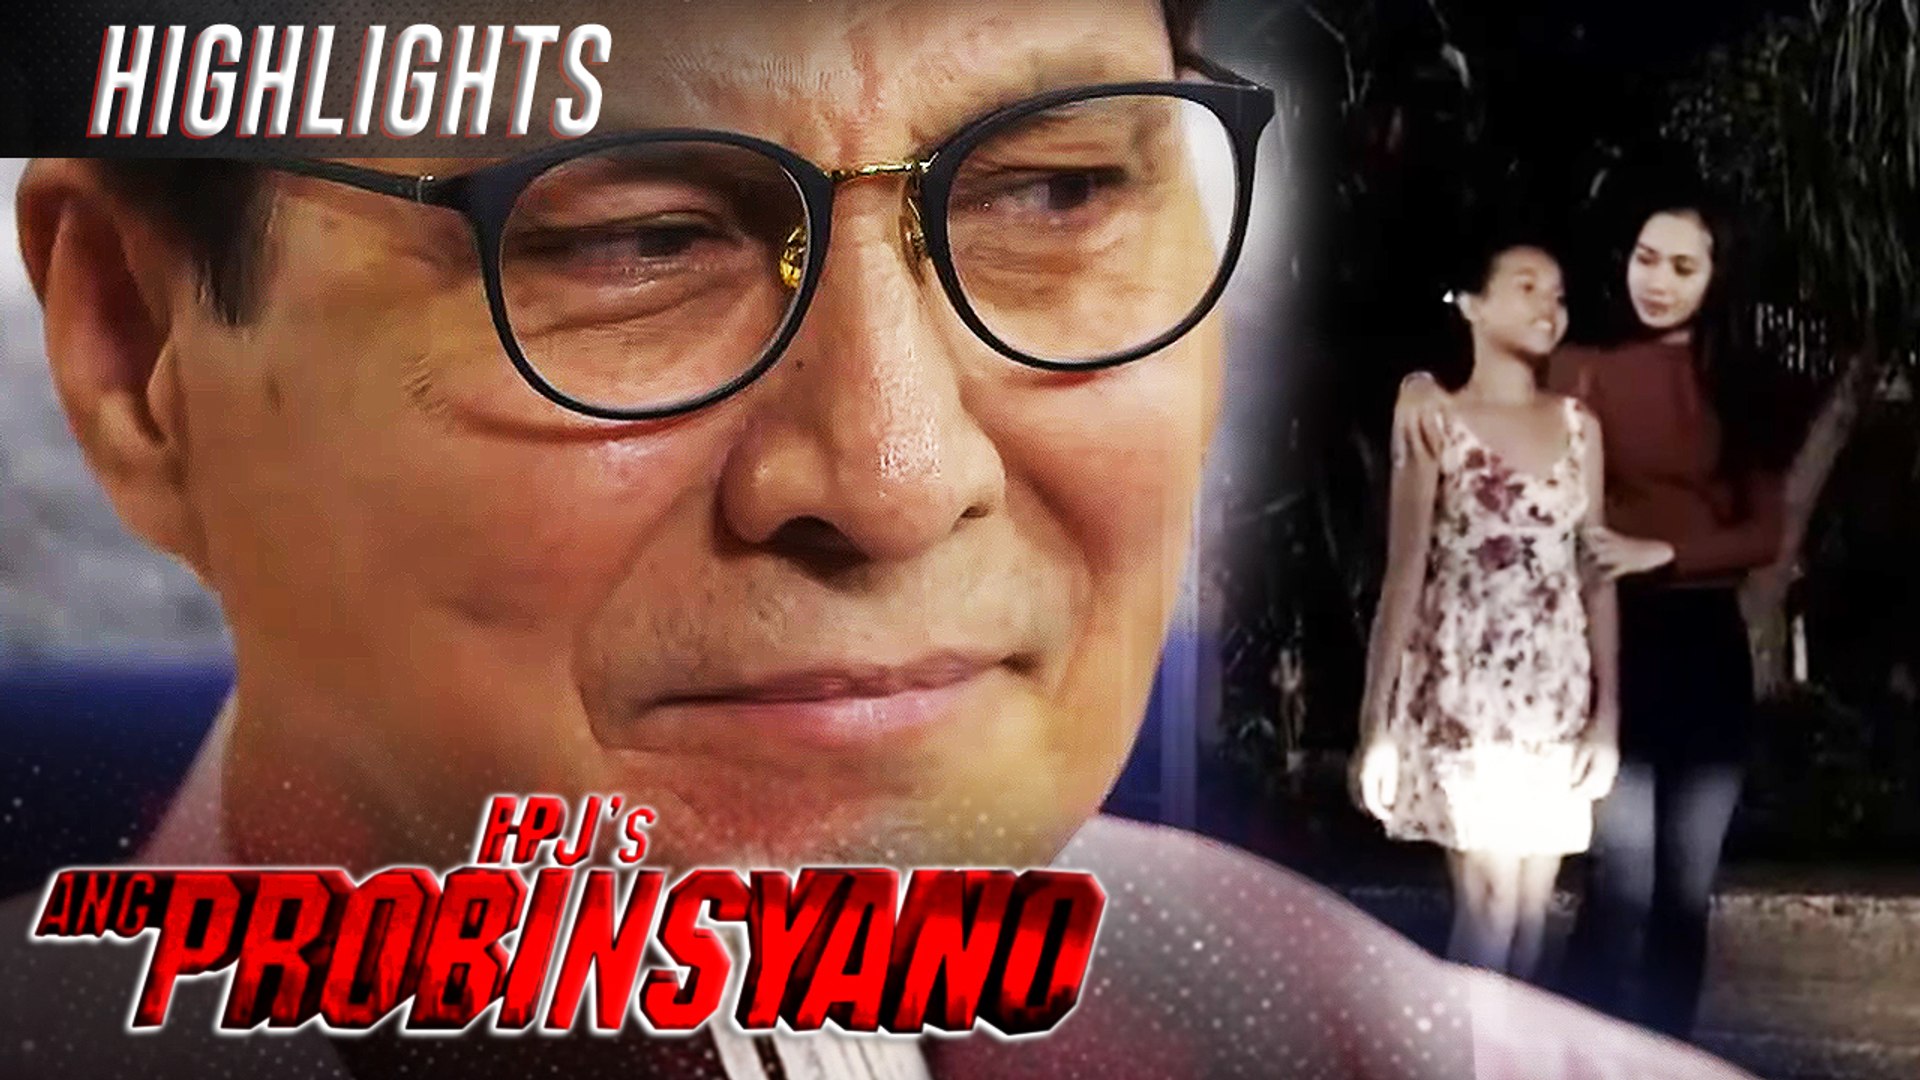 Arturo remembers what happened to his family | FPJ's Ang Probinsyano